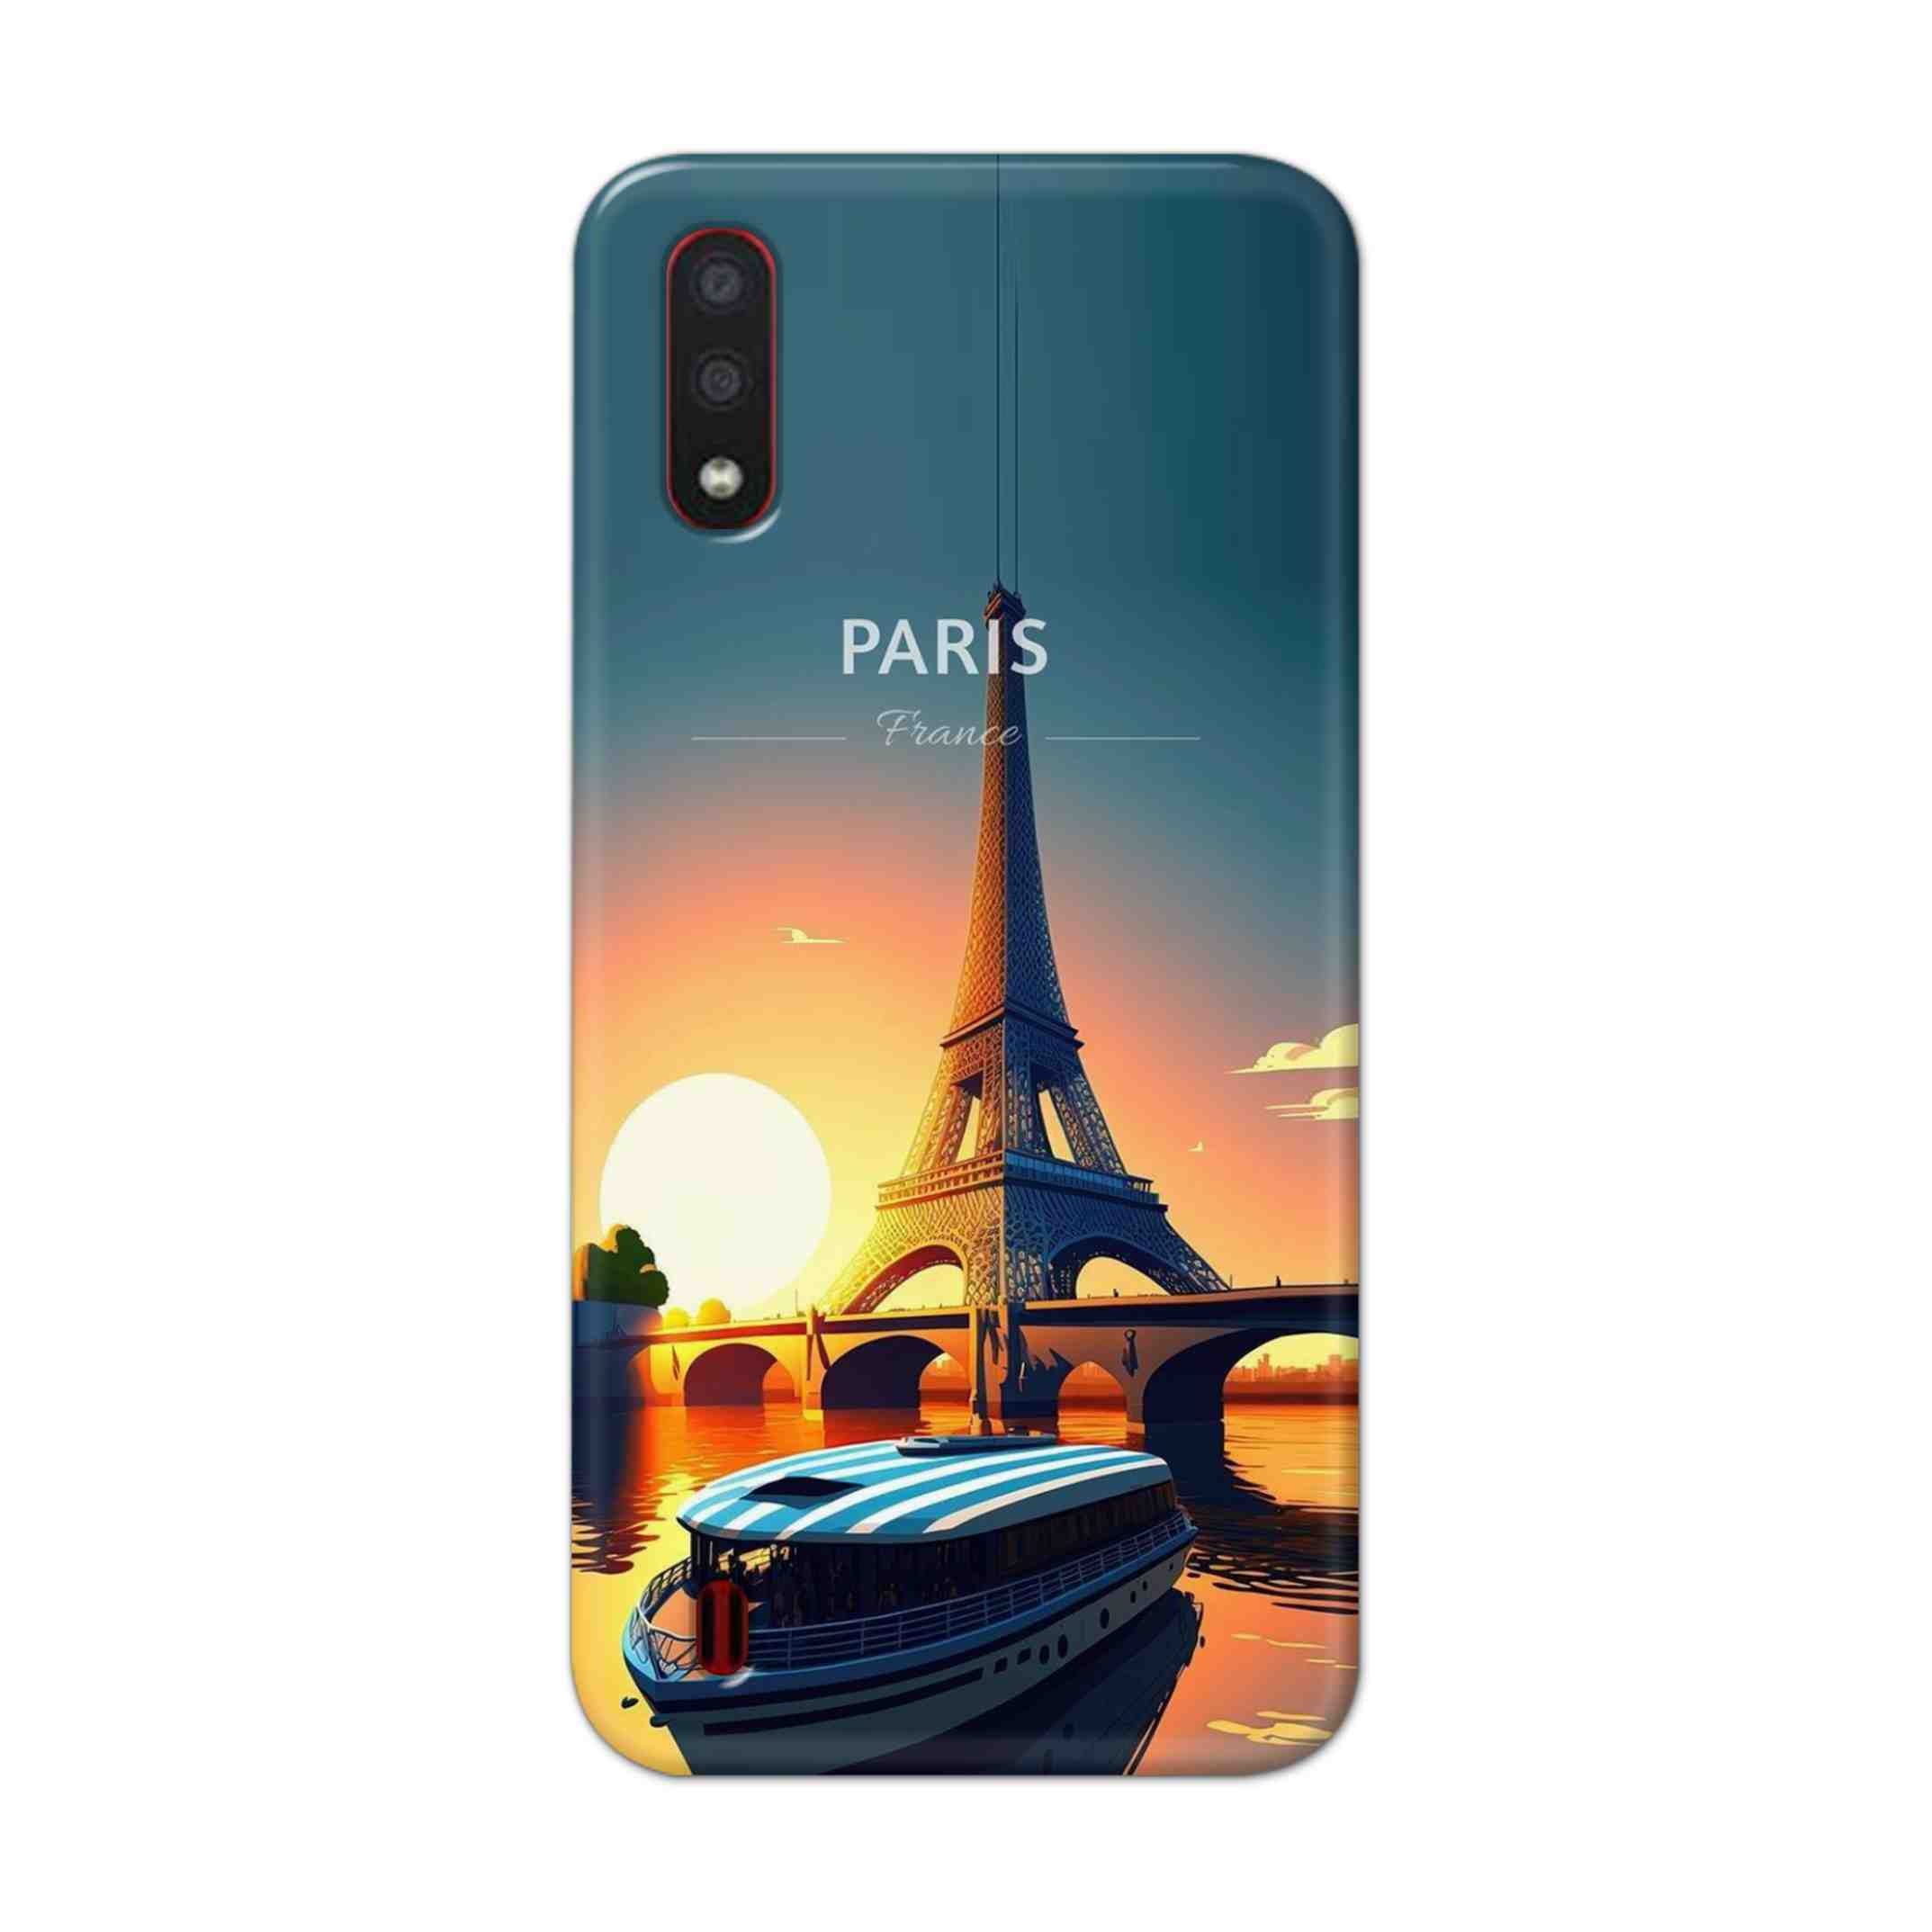 Buy France Hard Back Mobile Phone Case/Cover For Samsung Galaxy M01 Online